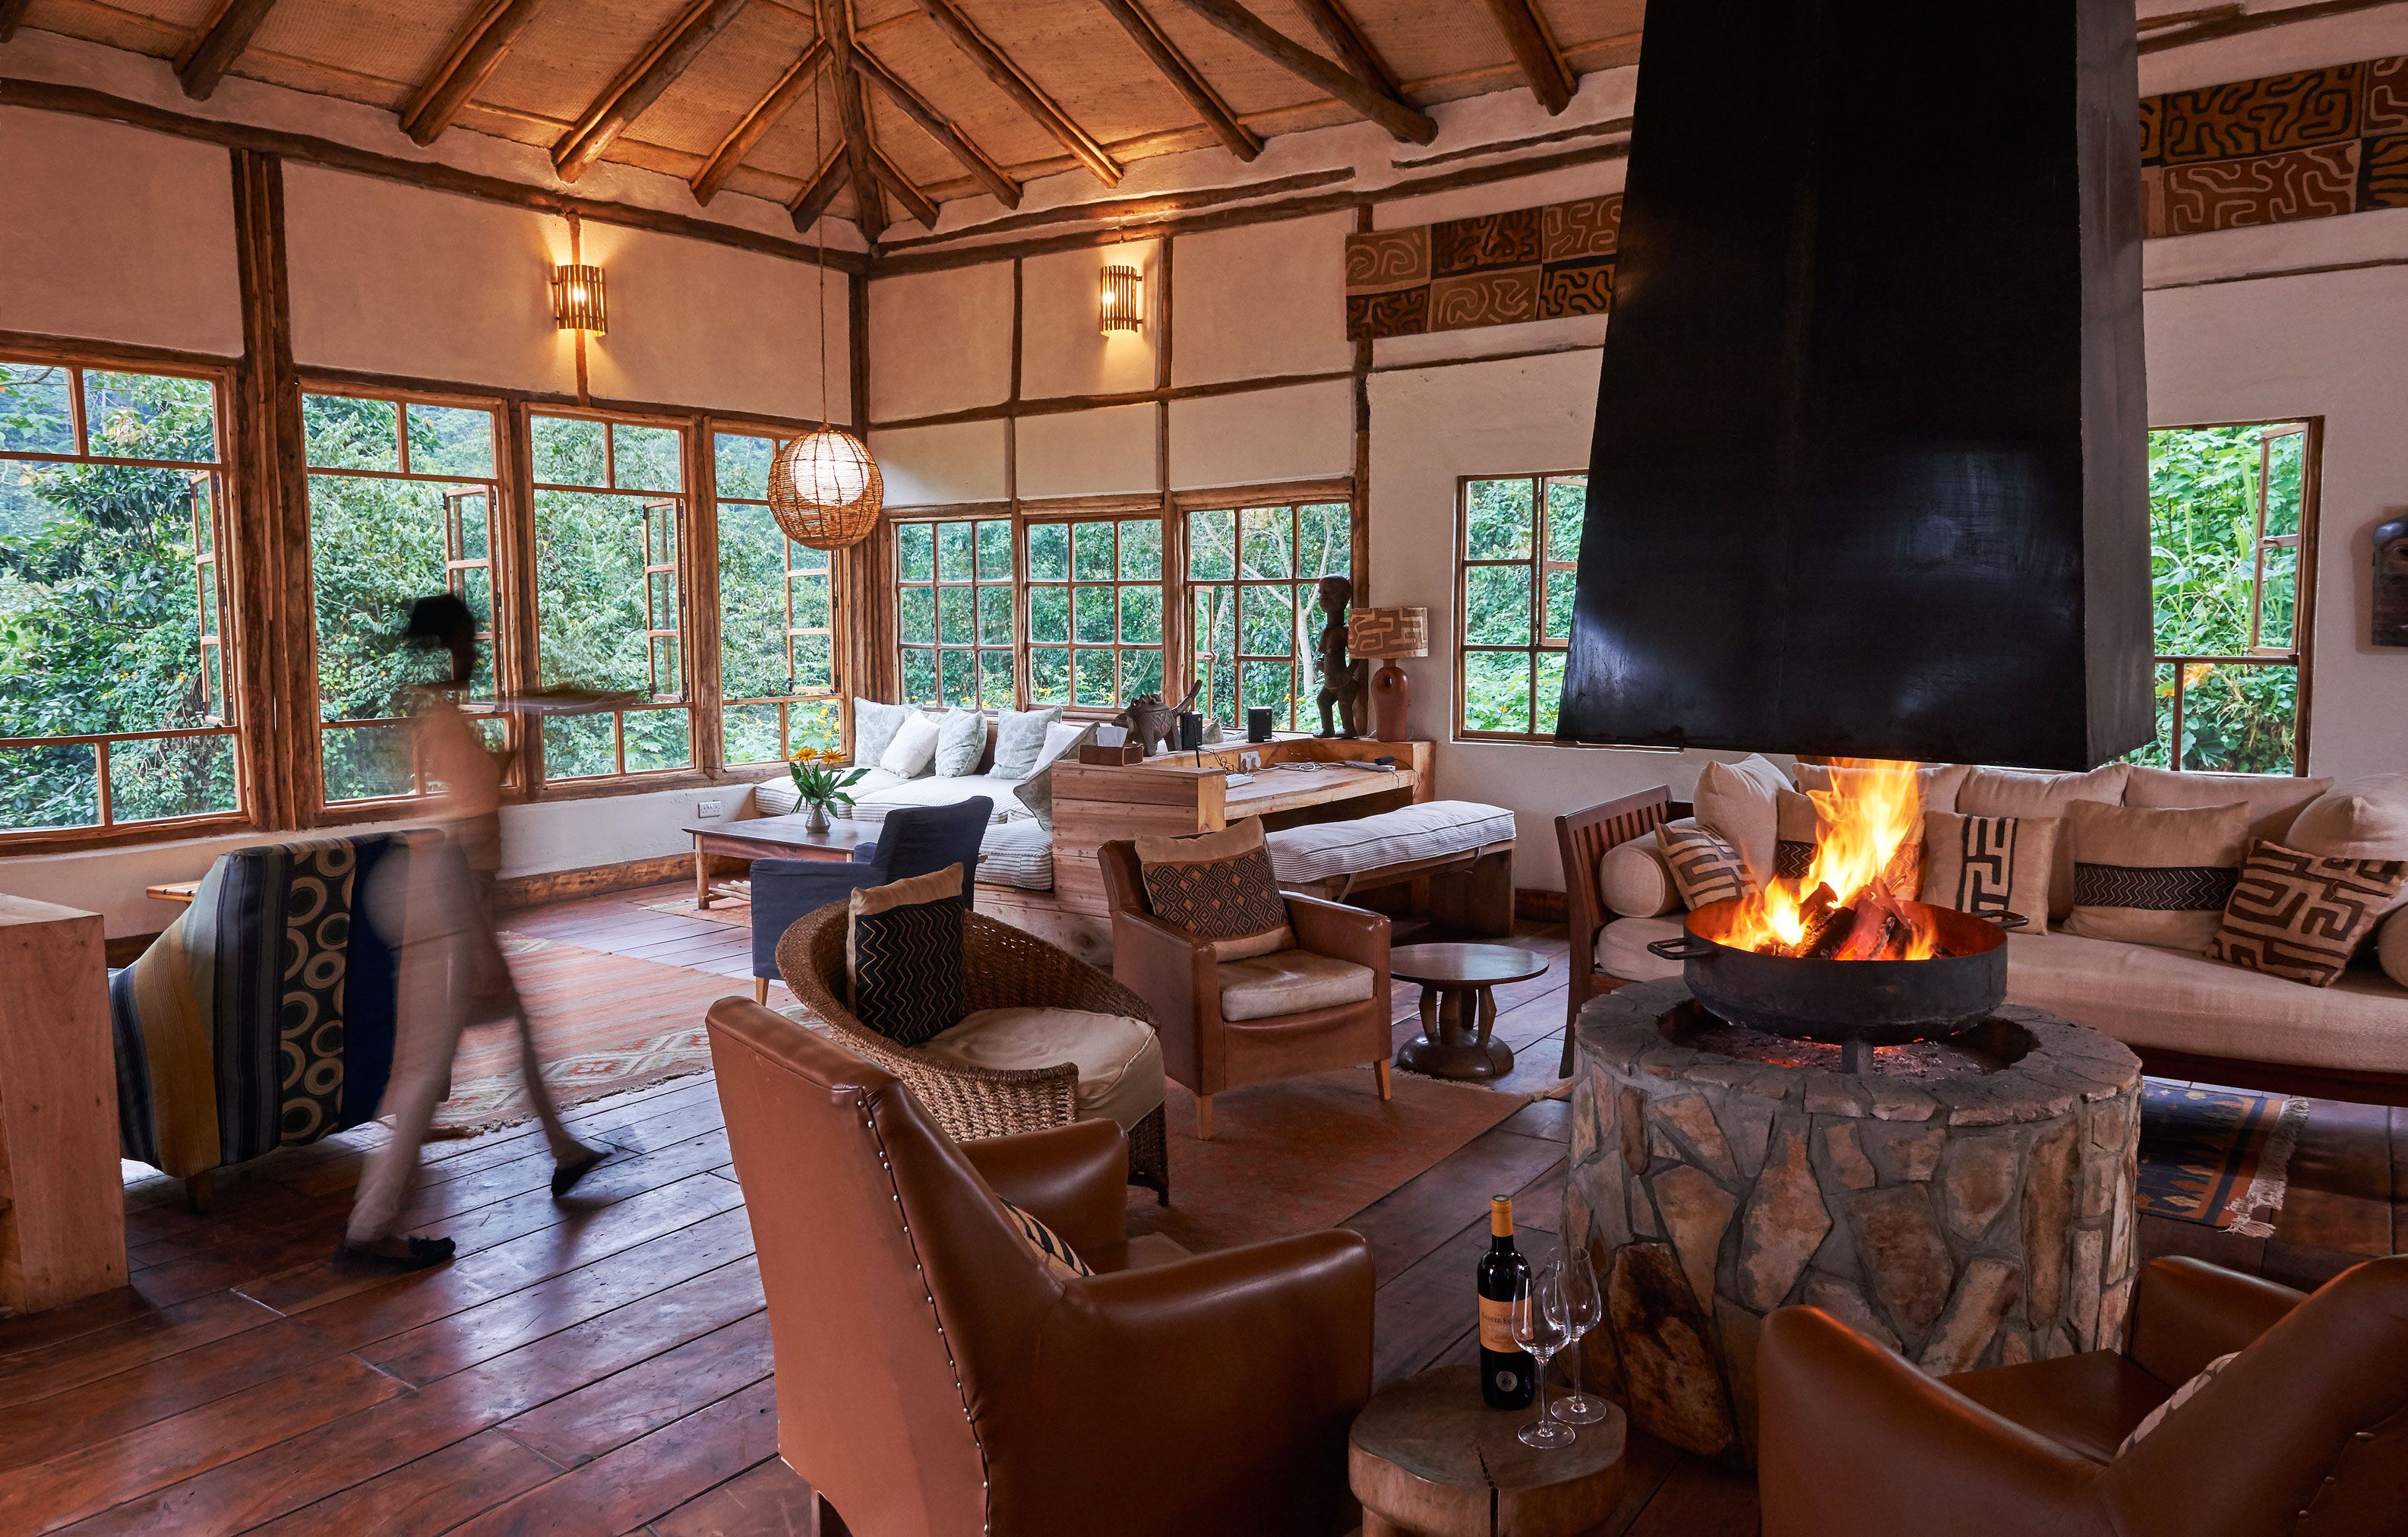 The Finest in Hotels and Safari Lodges